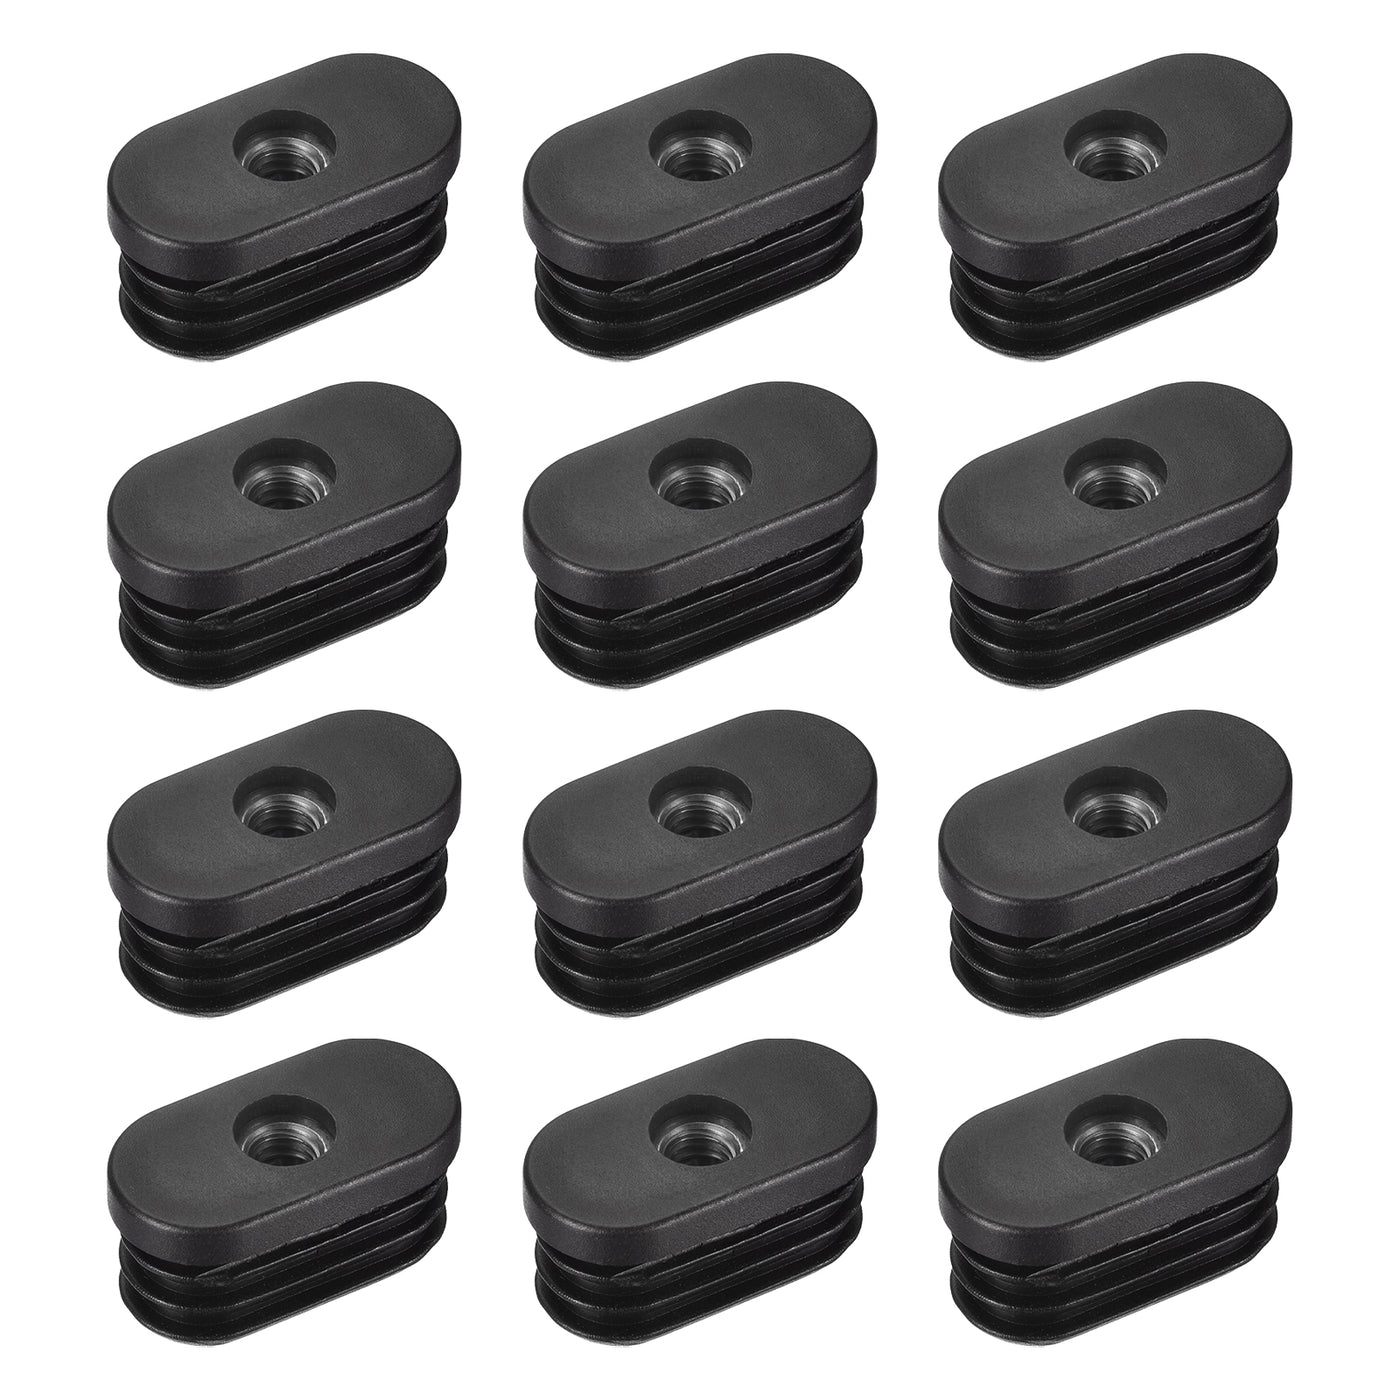 uxcell Uxcell 12Pcs 1.57"x0.79" Caster Insert with Thread, Oval M8 Thread for Furniture